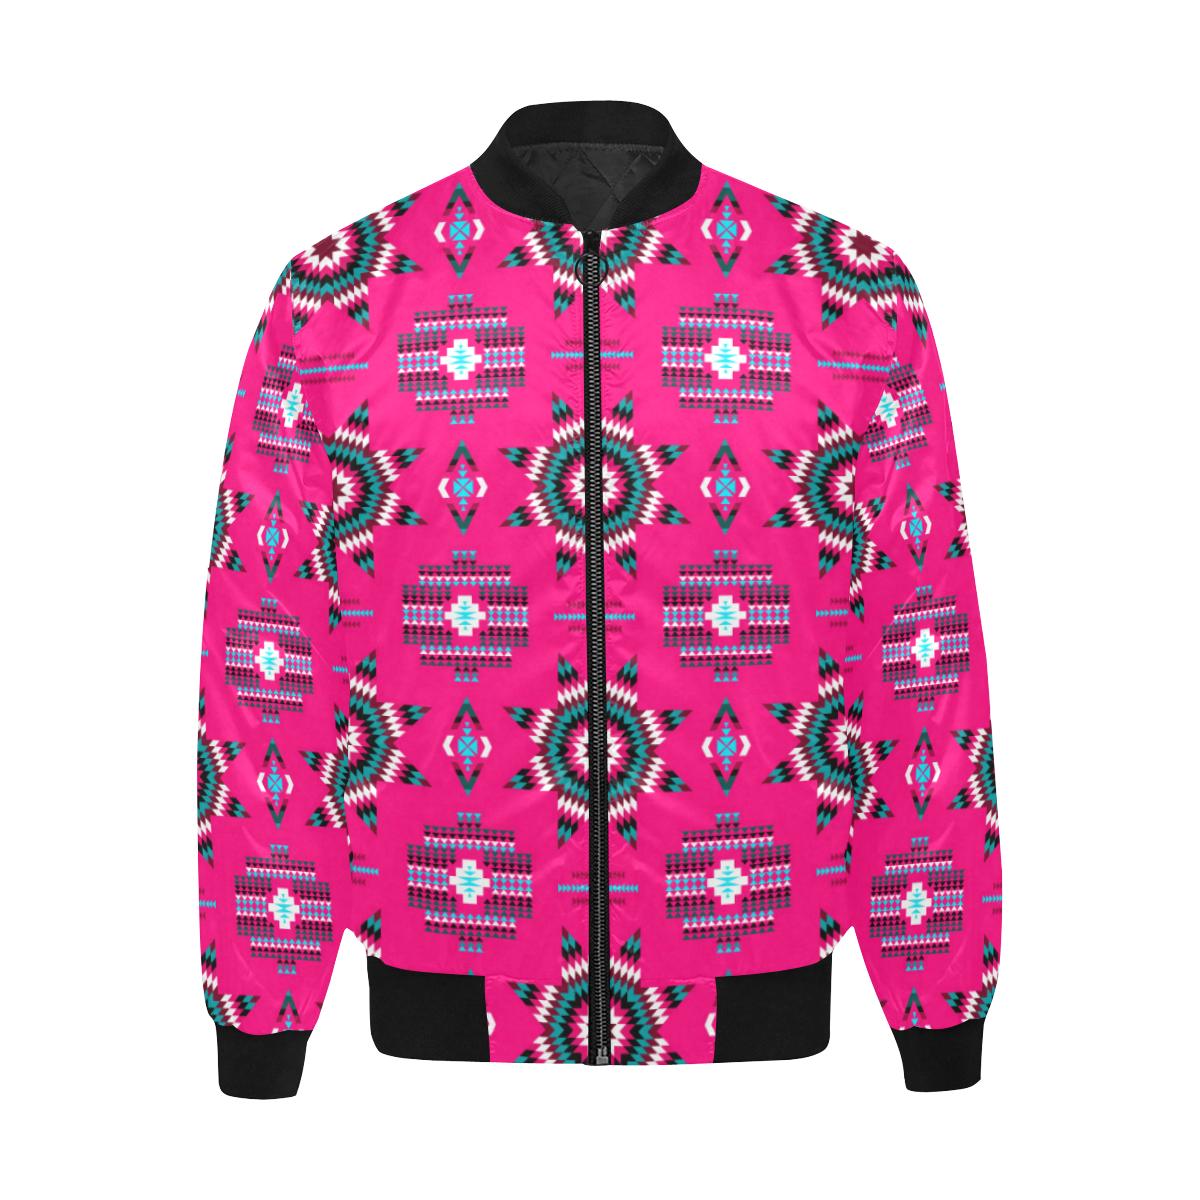 Rising Star Strawberry Moon Unisex Heavy Bomber Jacket with Quilted Lining All Over Print Quilted Jacket for Men (H33) e-joyer 